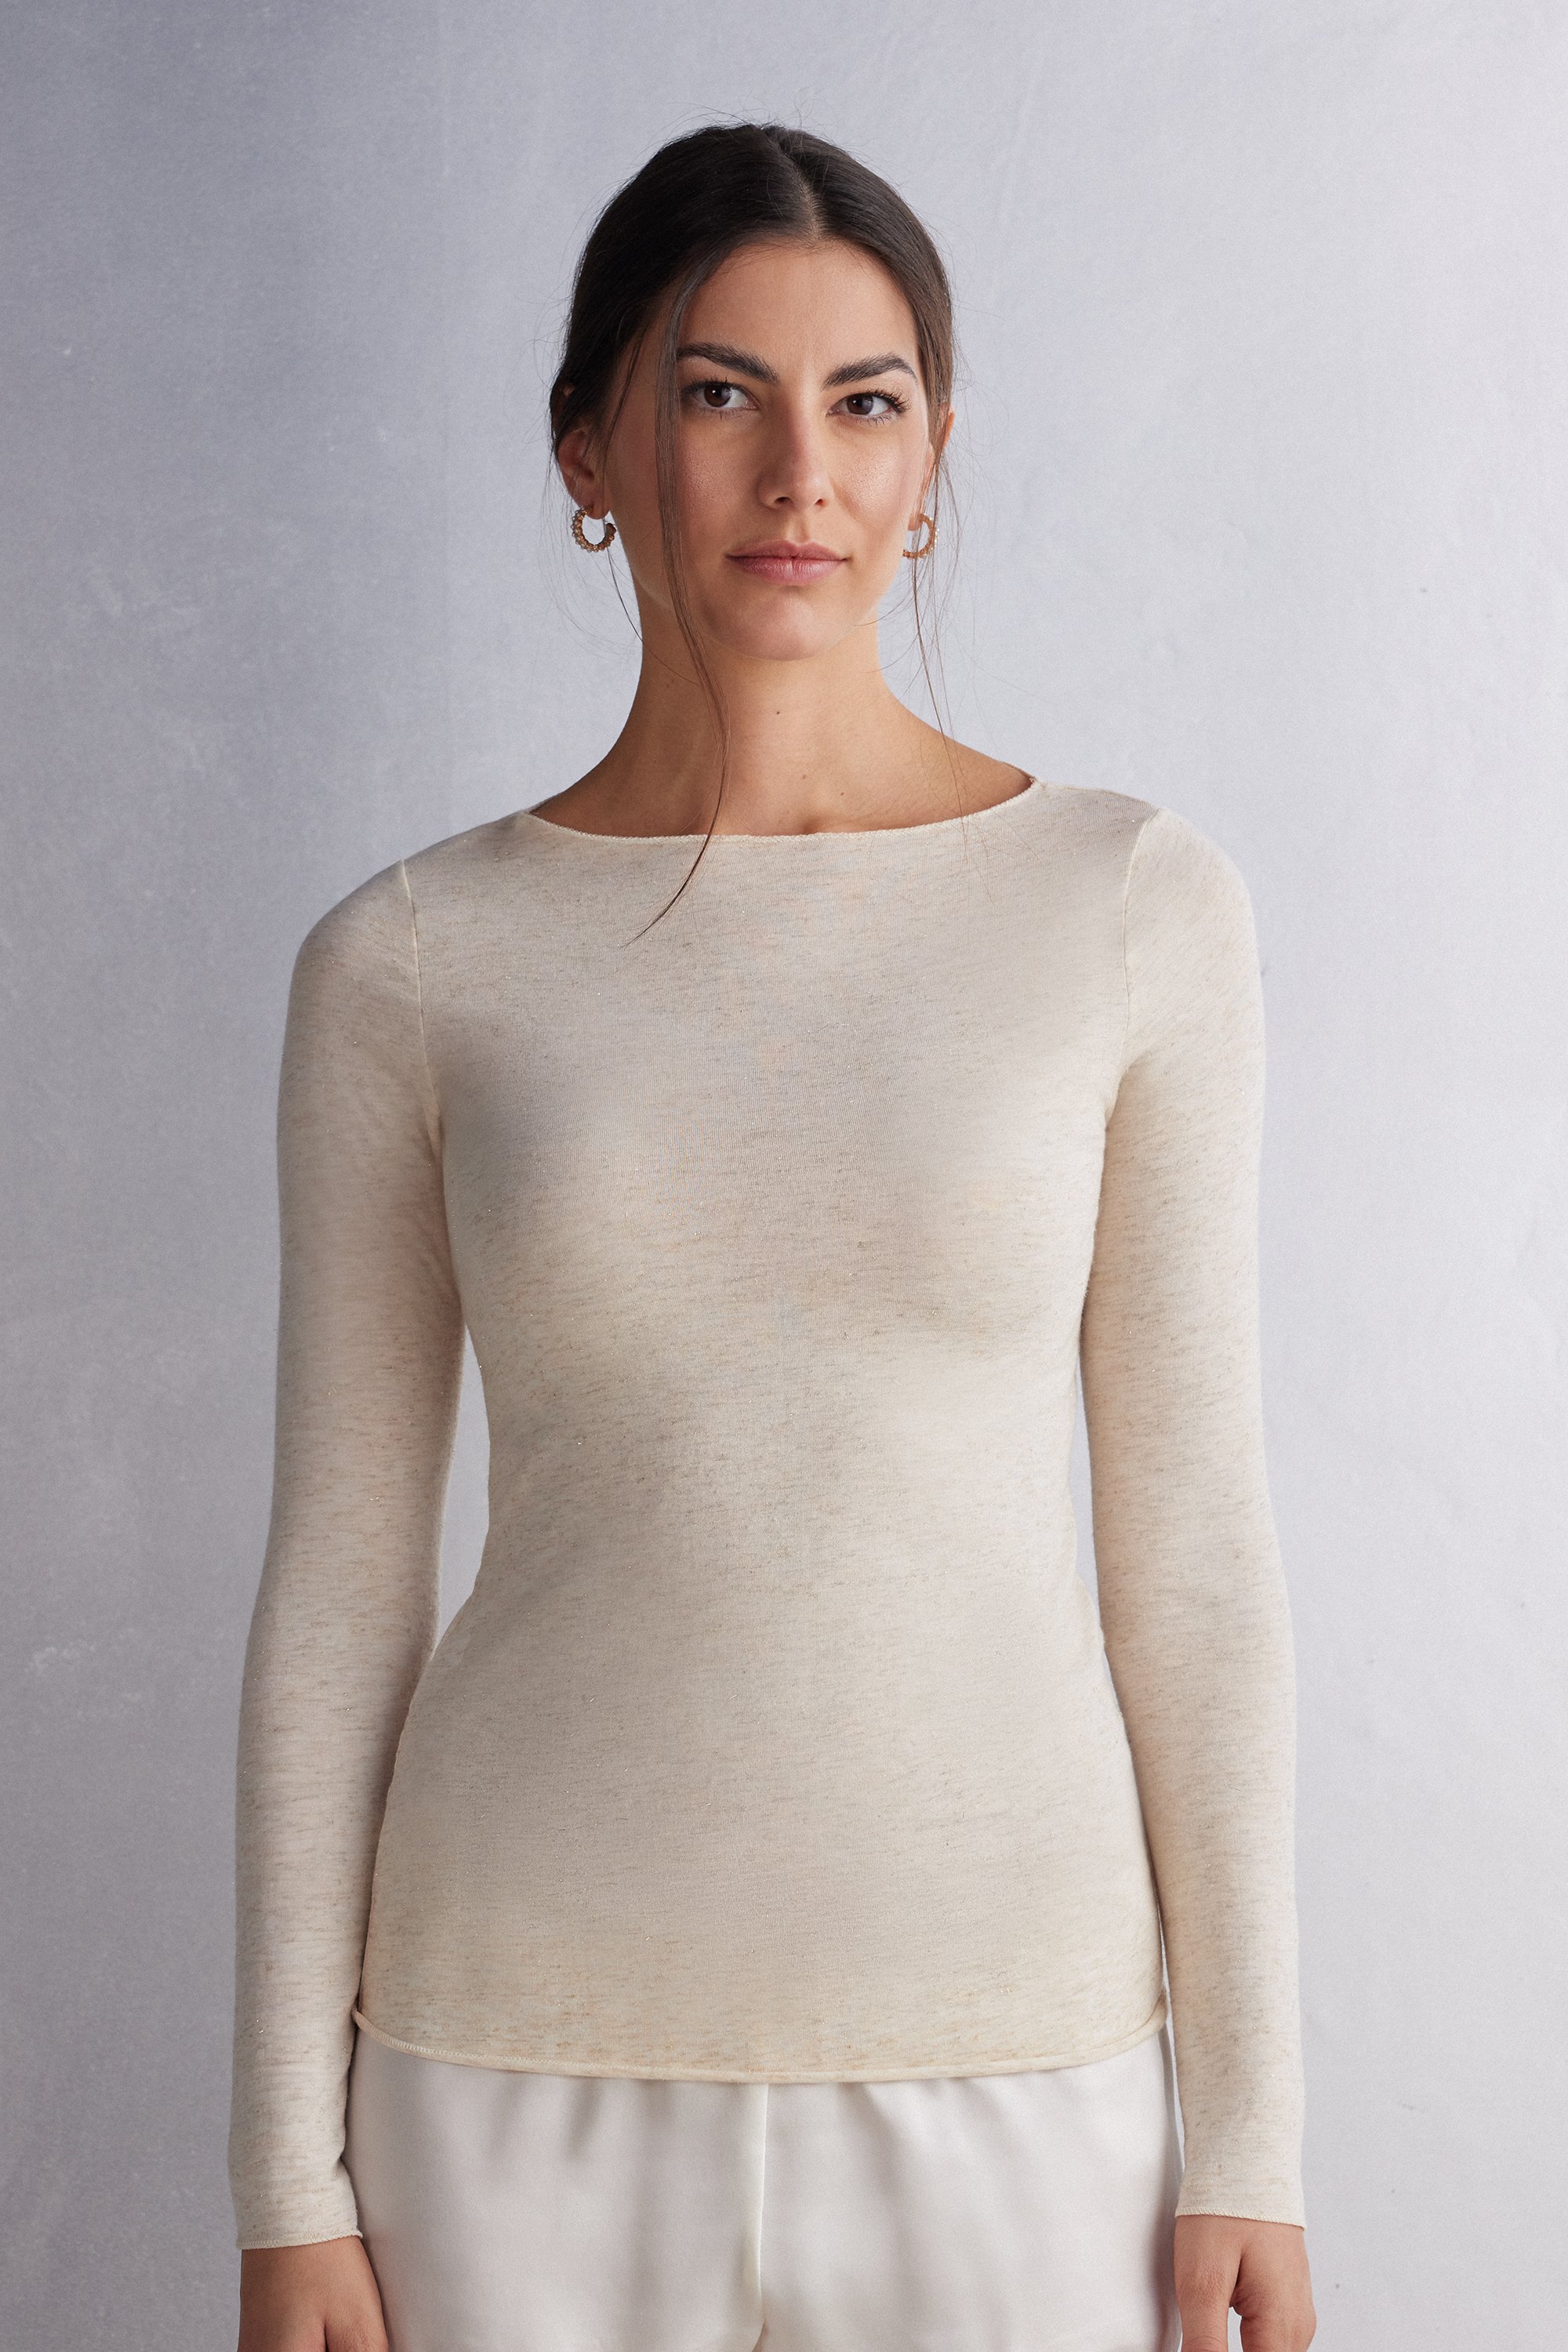 Crewneck Top in Modal Light with Cashmere Lamé - Intimissimi